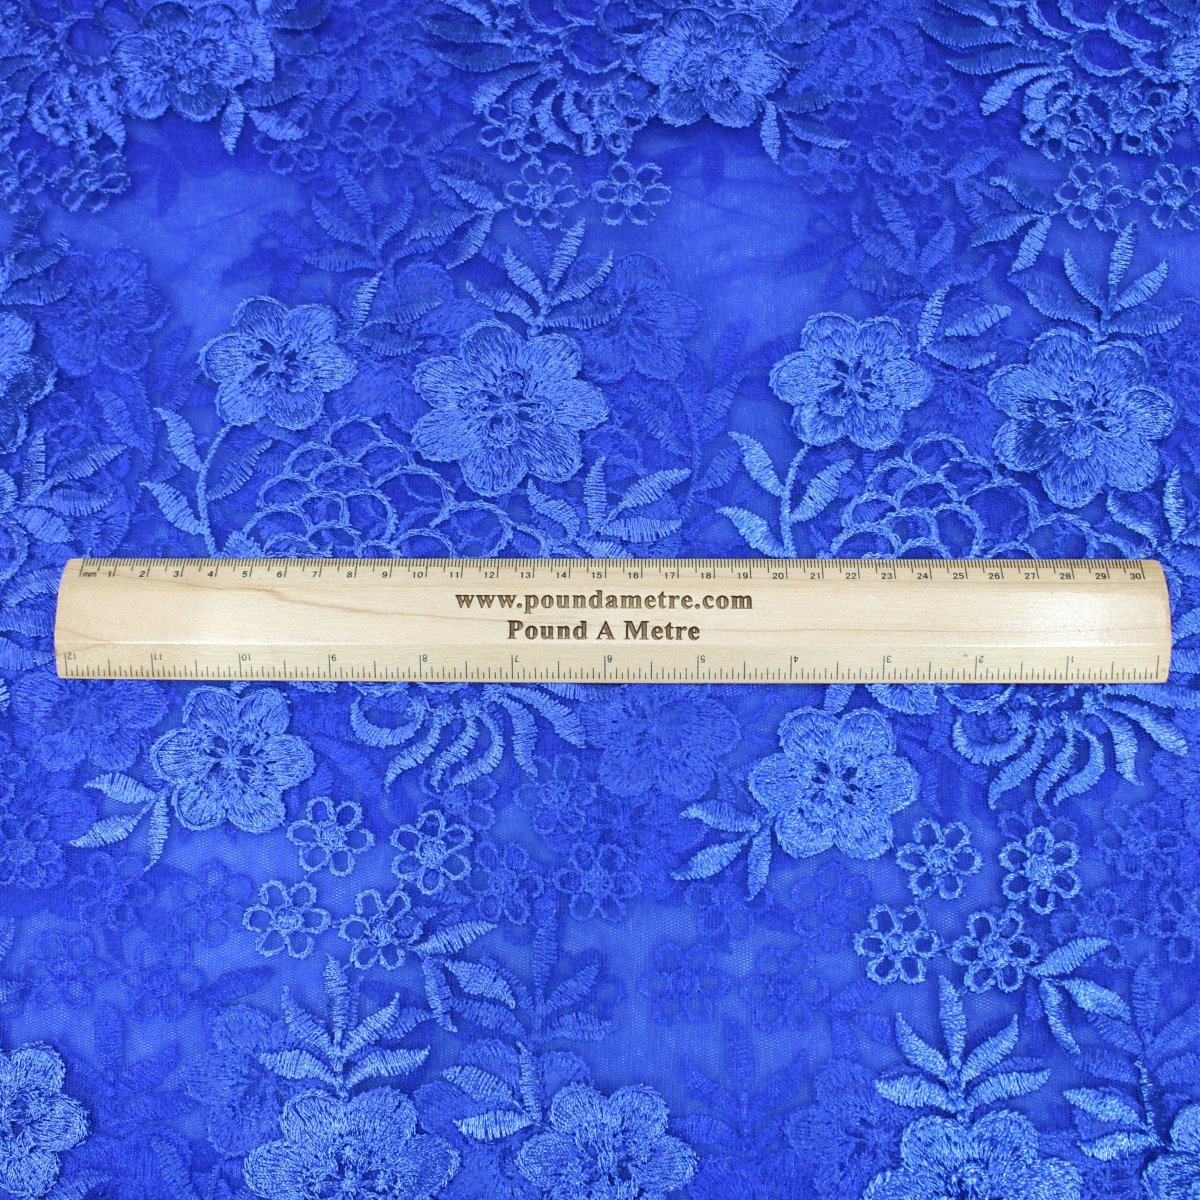 3 Metres Luxury Detailed Bridal Lace Fabric - 55" Wide Royal Blue - Pound A Metre